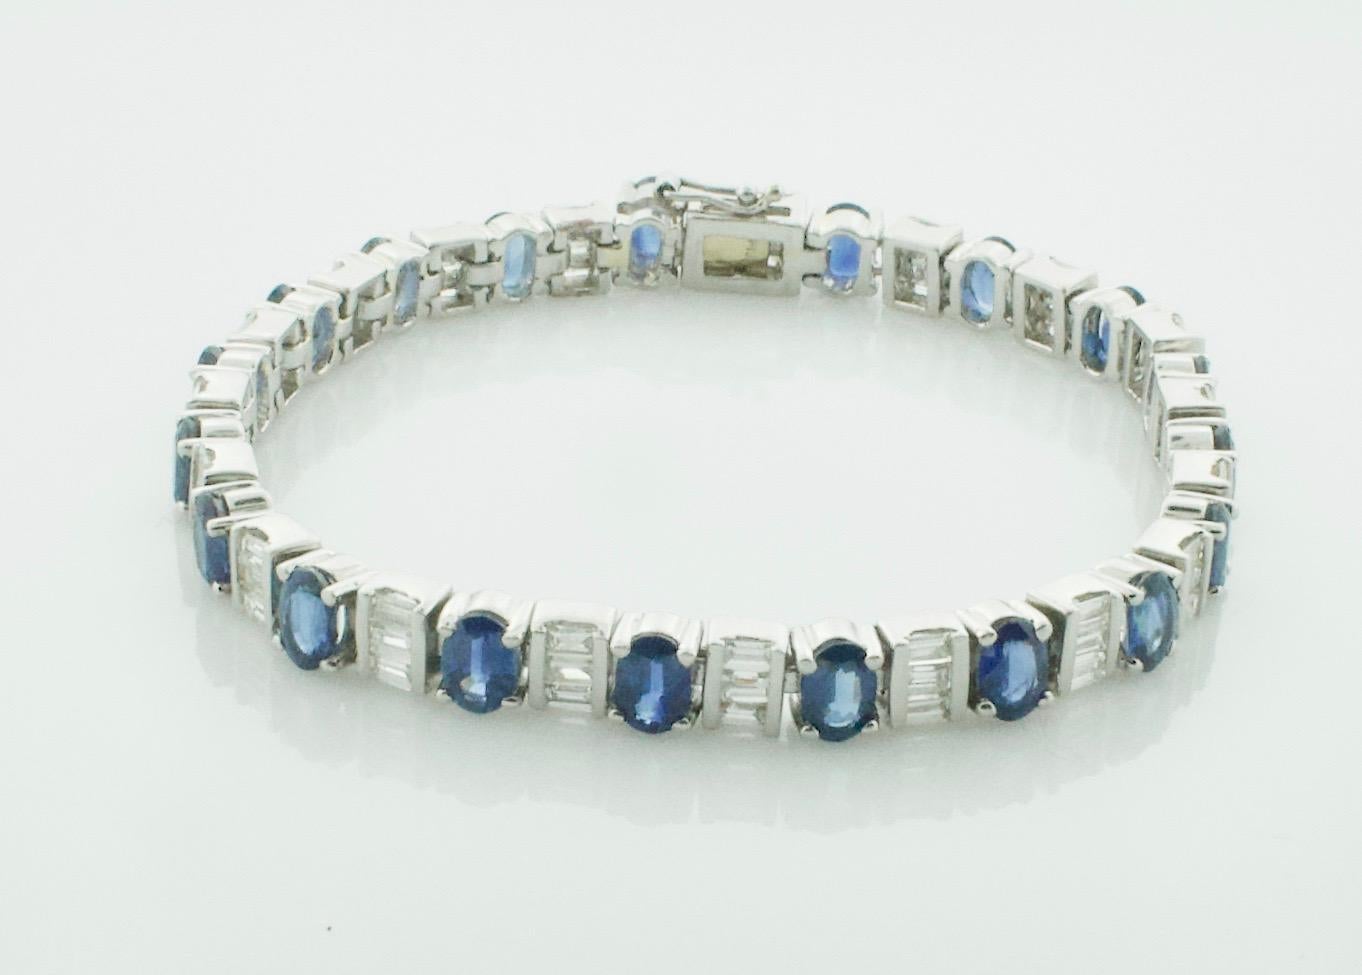 Substancial Sapphire and Diamond Tennis Bracelet 11.00 Carats in Platinum
Sixteen Oval Sapphires Weighing 11.00 Carats Approximately [bright with no imperfections visible to the naked eye]
Sixty Tapered Baguette Diamonds Weighing 4.25 Carats